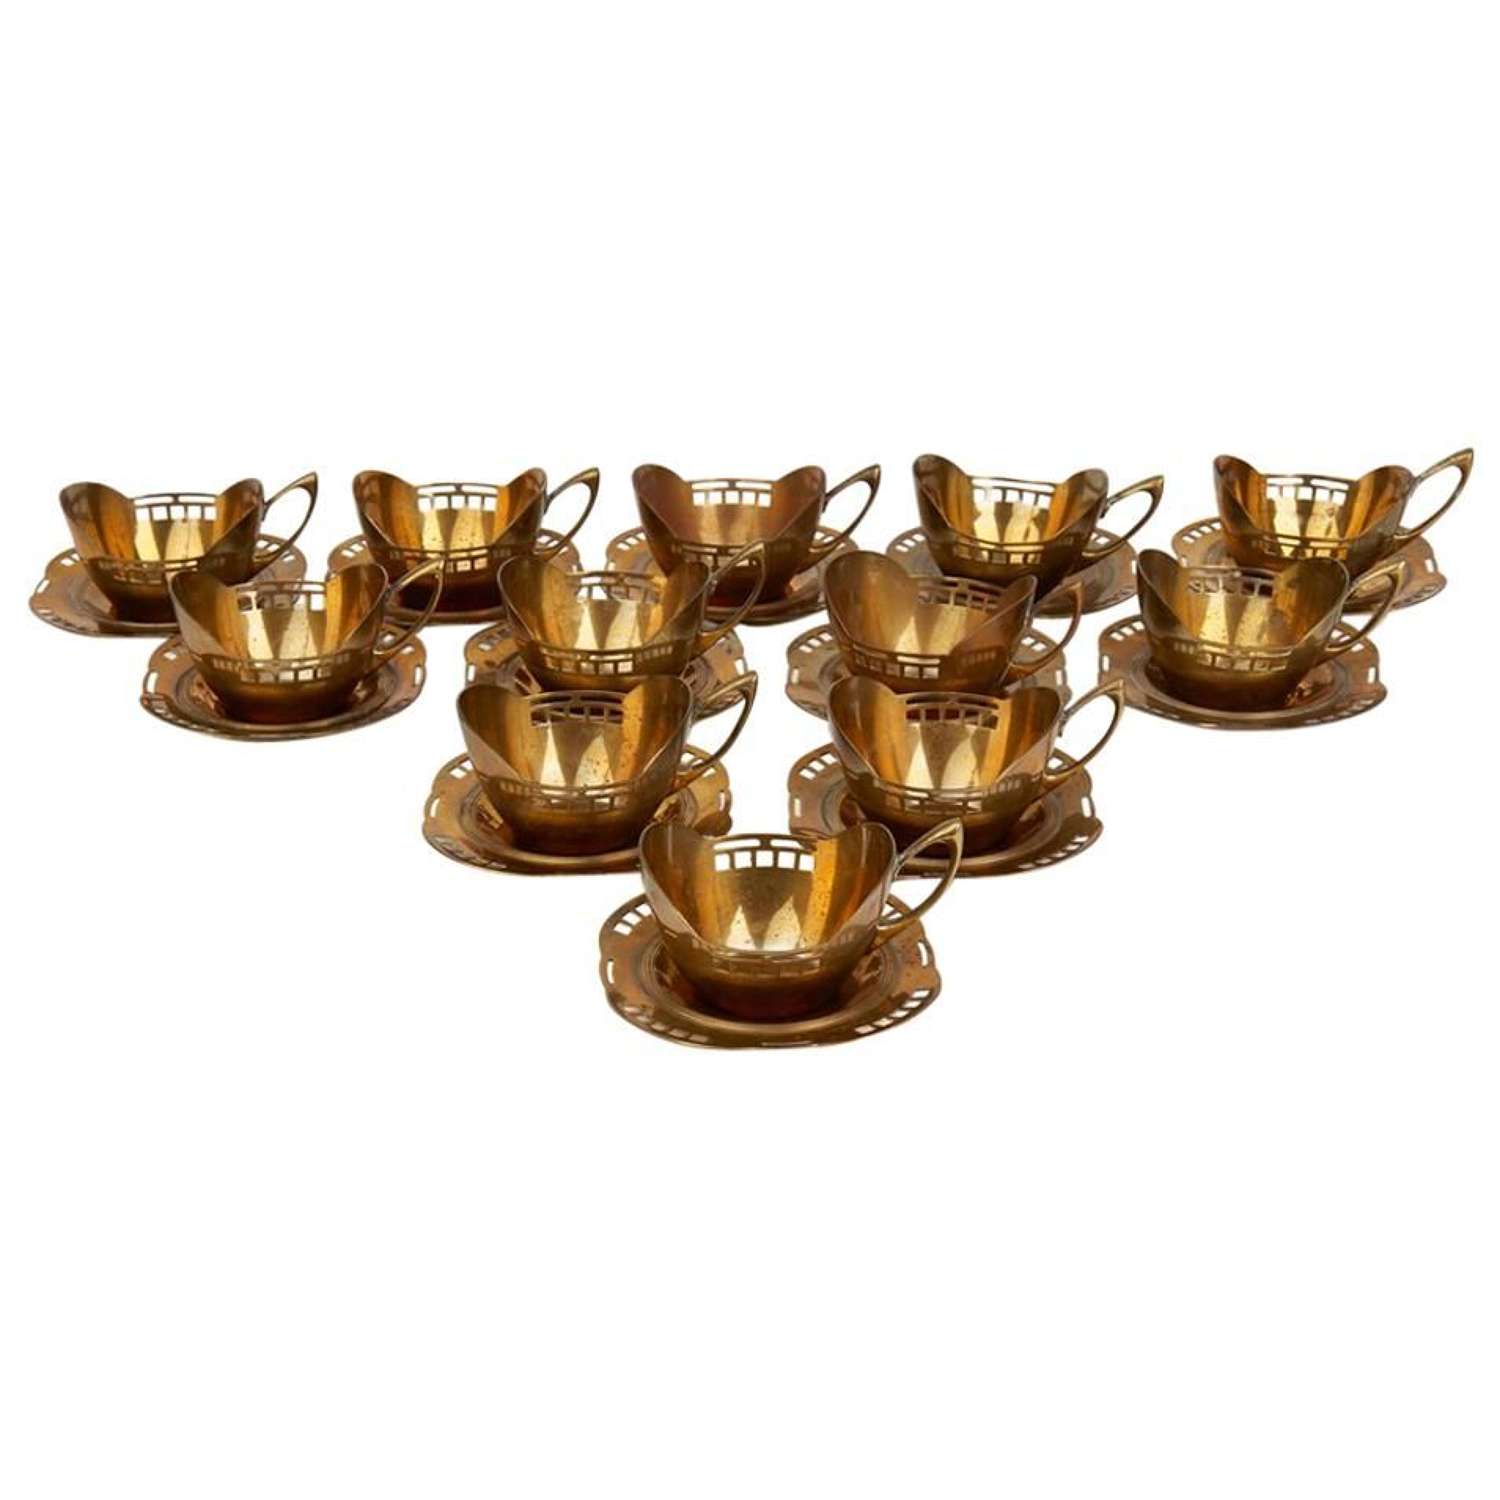 Secessionist Argentor Teacup Holders and Saucers Hans Ofner